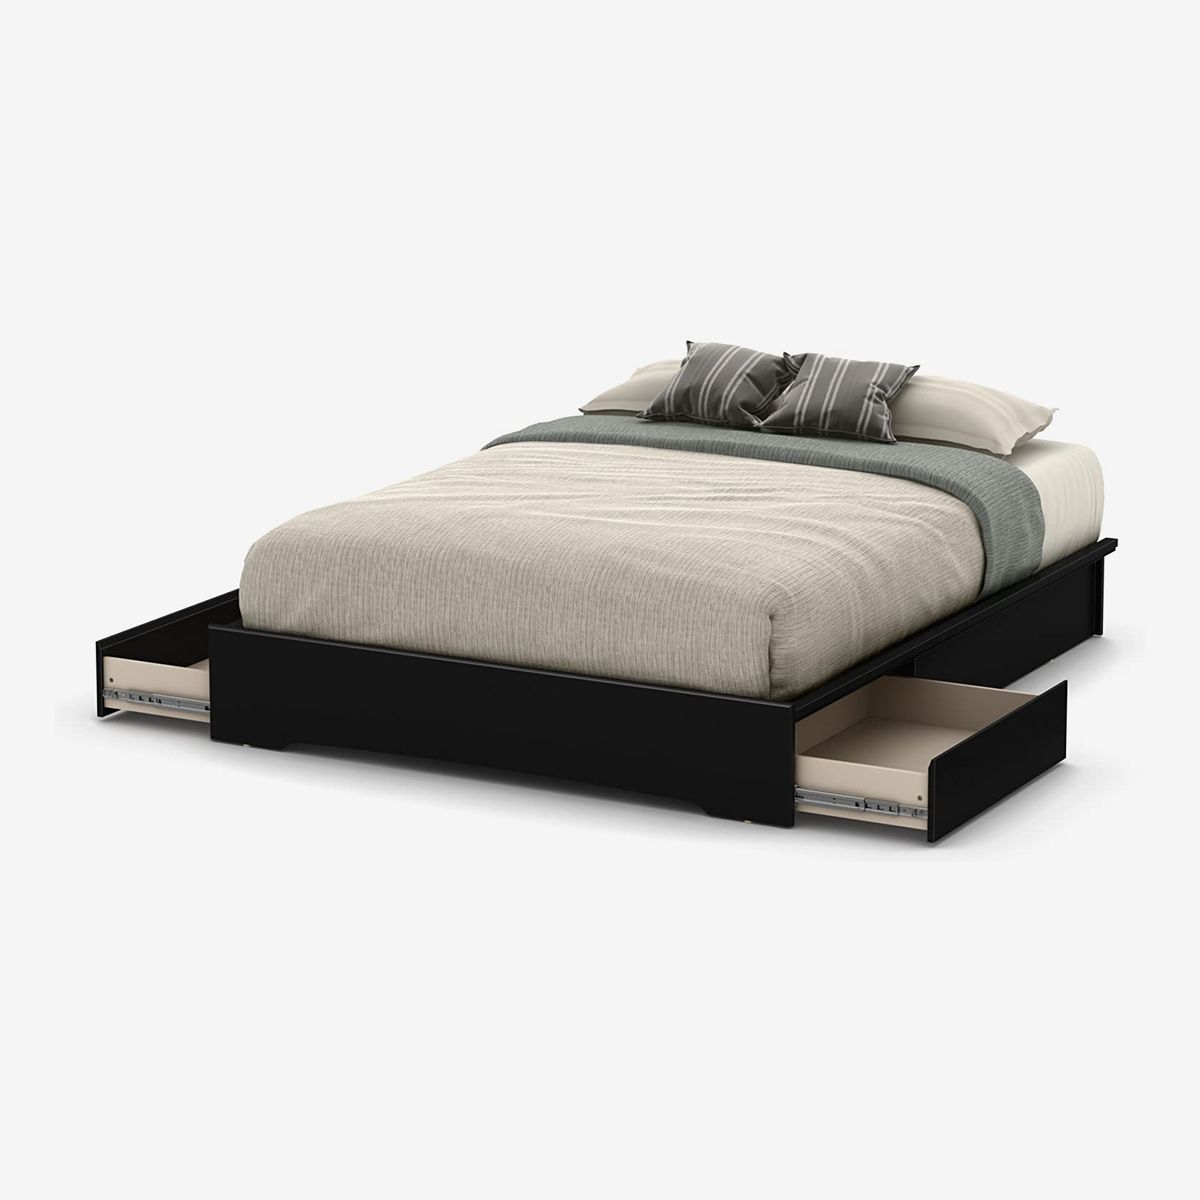 Modern Platform Beds With Storage, Black Bed Frame With Drawers Queen